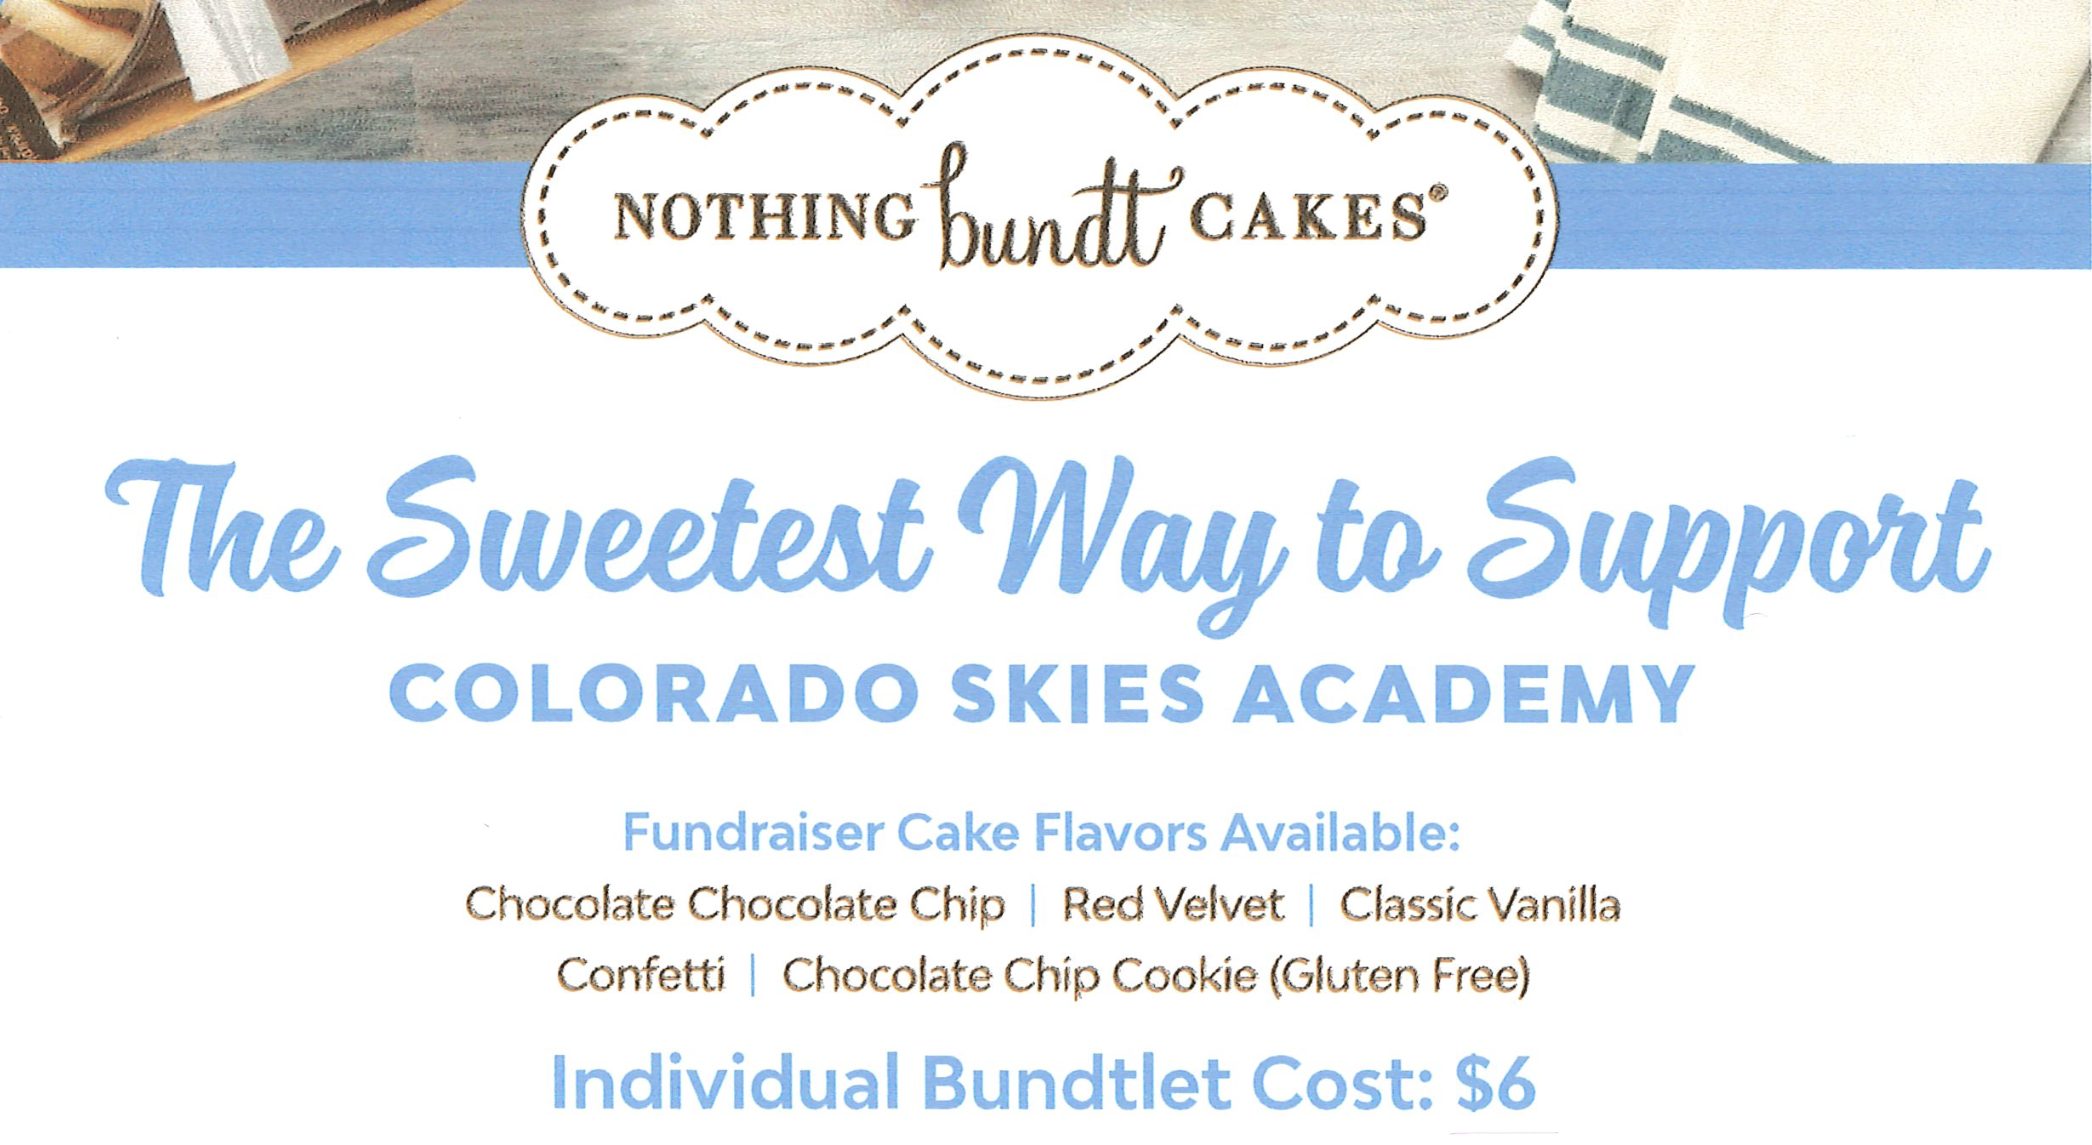 Nothing Bundt Cakes...the sweetest way to support Colorado Skies Academy! Fundraiser Cake Flavors Available: Chocolate Chocolate Chip, Red Velvet, Classic Vanilla, Confetti, Chocolate Chip Cookie (Gluten Free). Individual bundtlet cost: $6. Supplied by the Nothing Bundt Cakes Lone Tree location at 7508 E Parkway Dr Suite 200, (303) 925-1600. Cakes contain wheat, milk, eggs, and soy. Cakes may contain traces of tree nuts and peanuts.